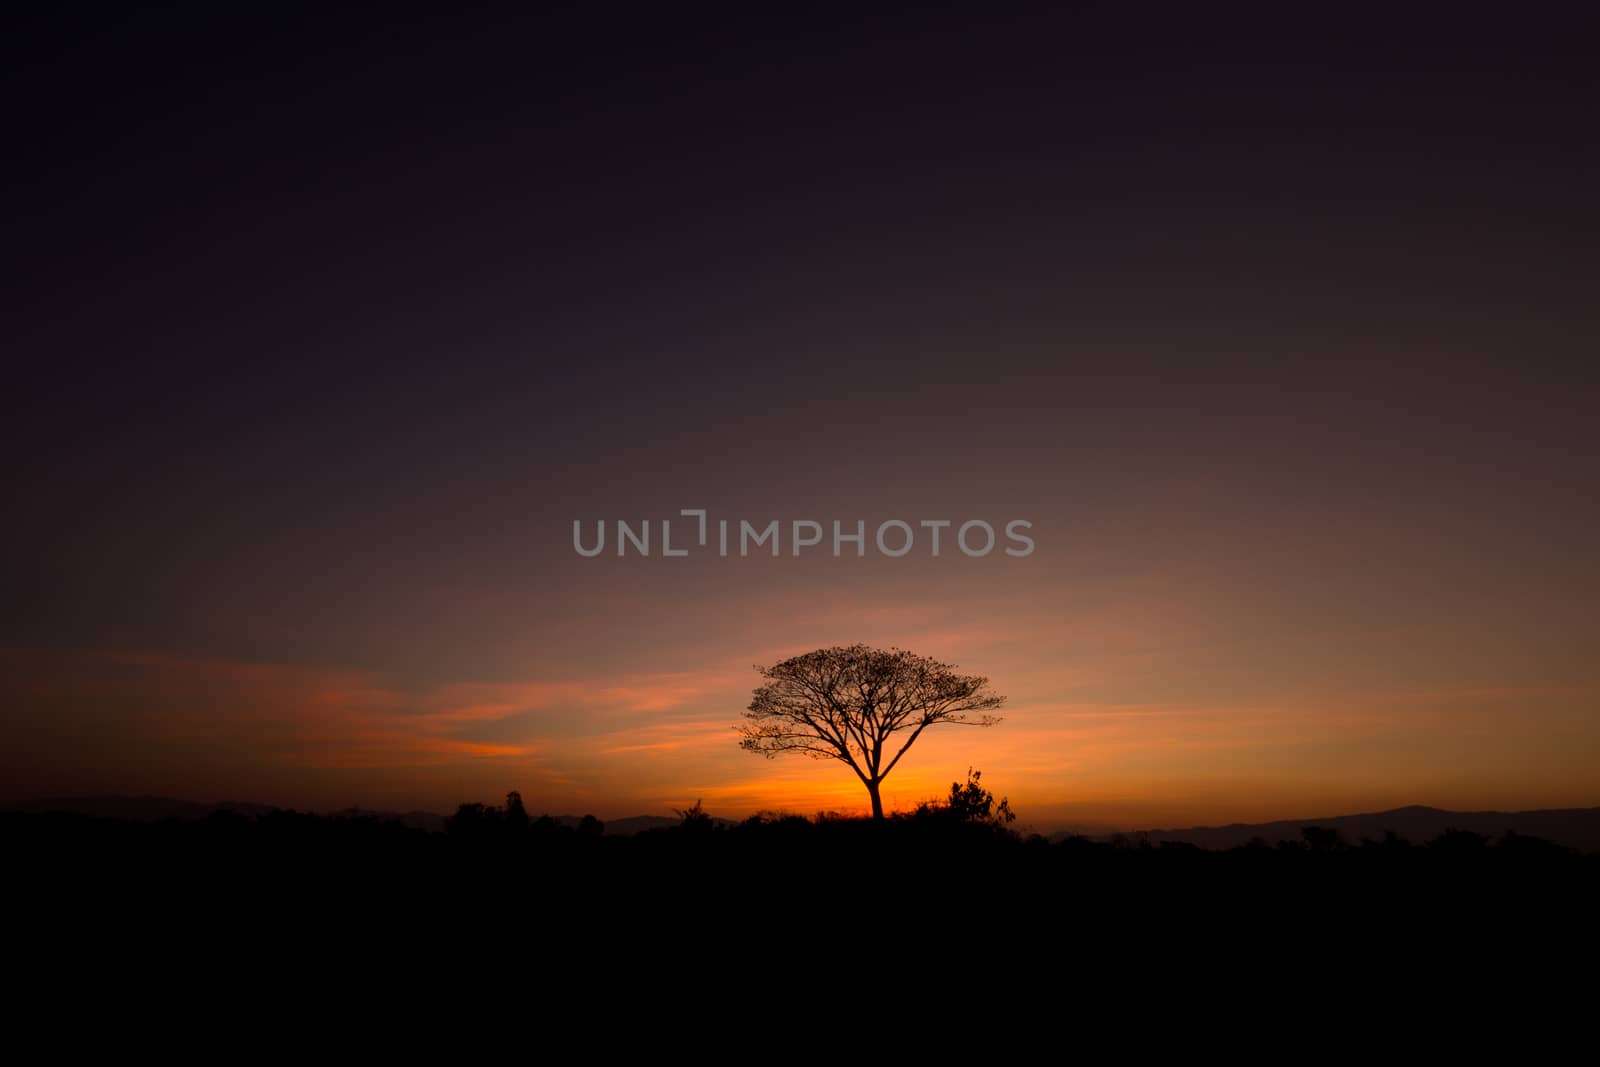 tree in silhouette style by a3701027